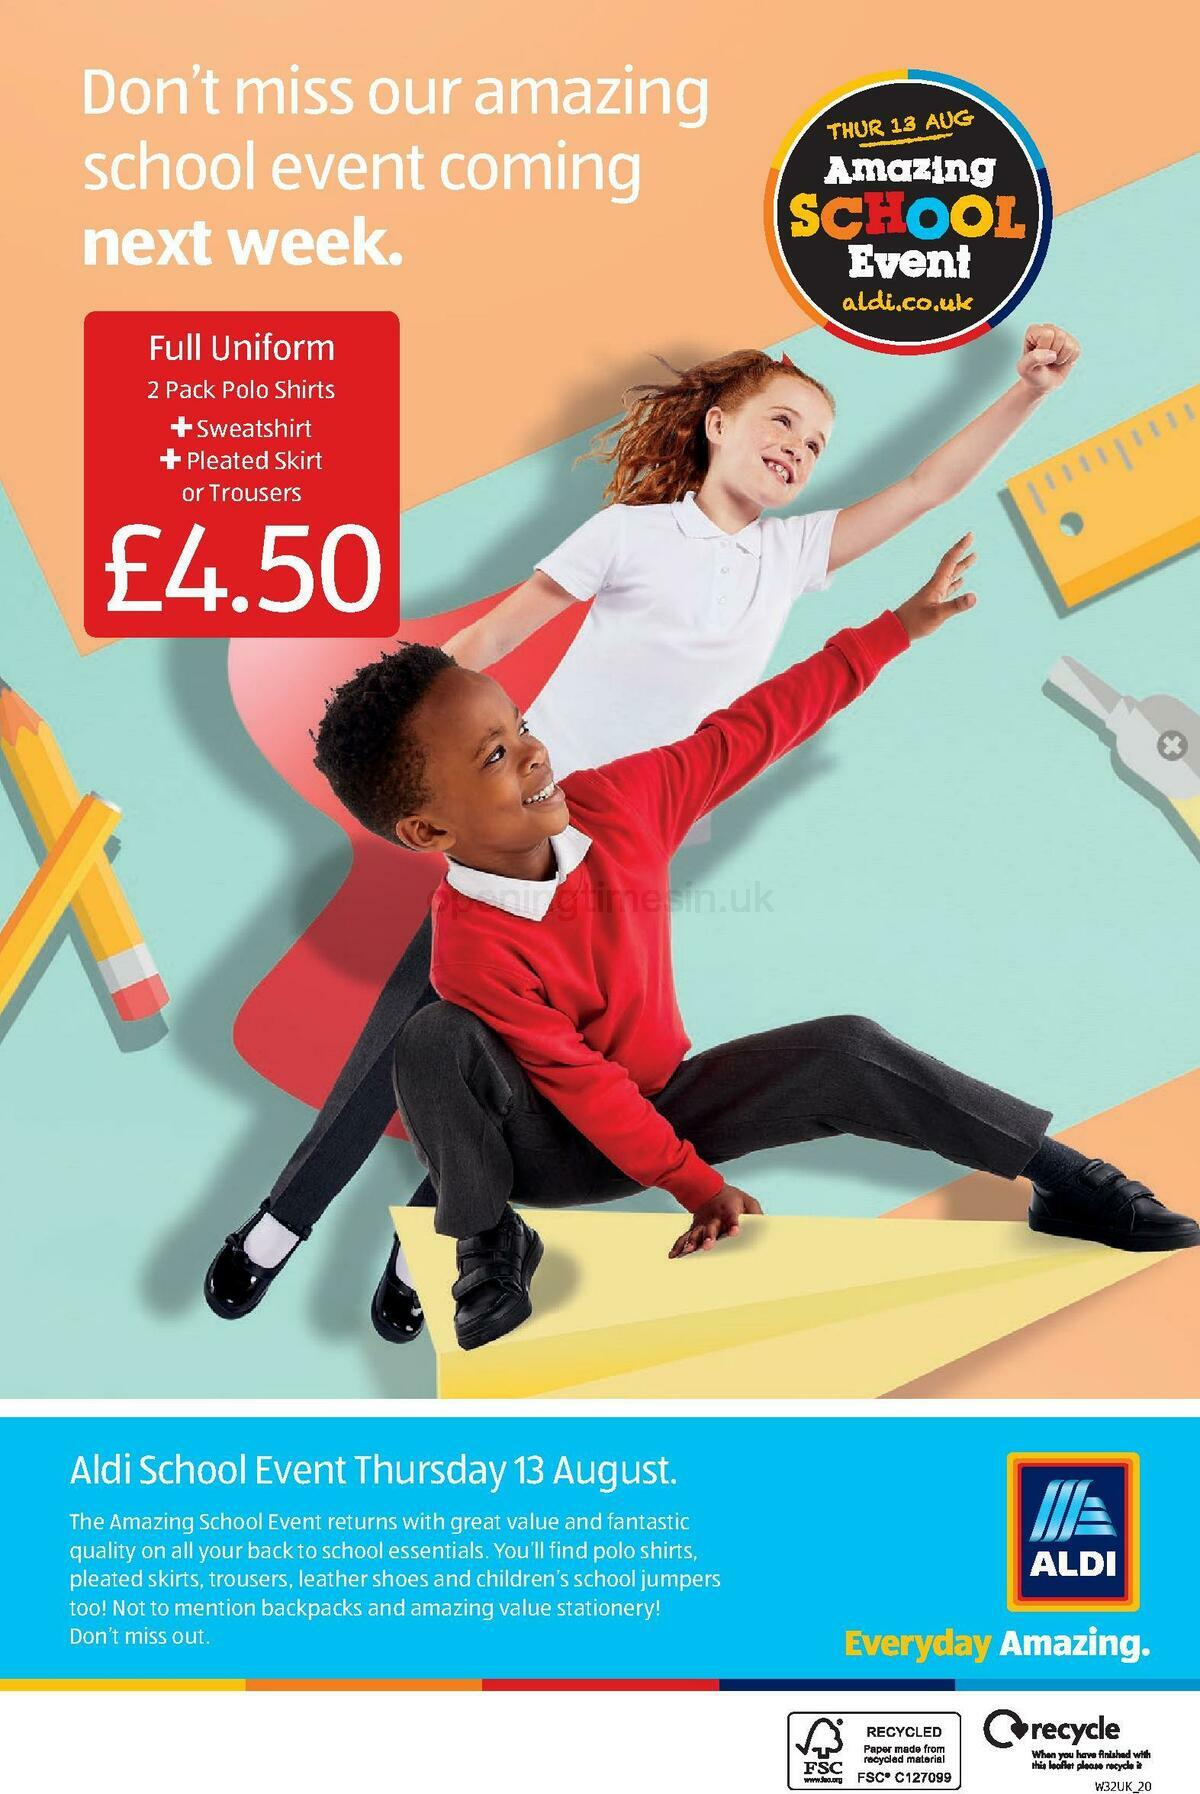 ALDI Offers from 6 August